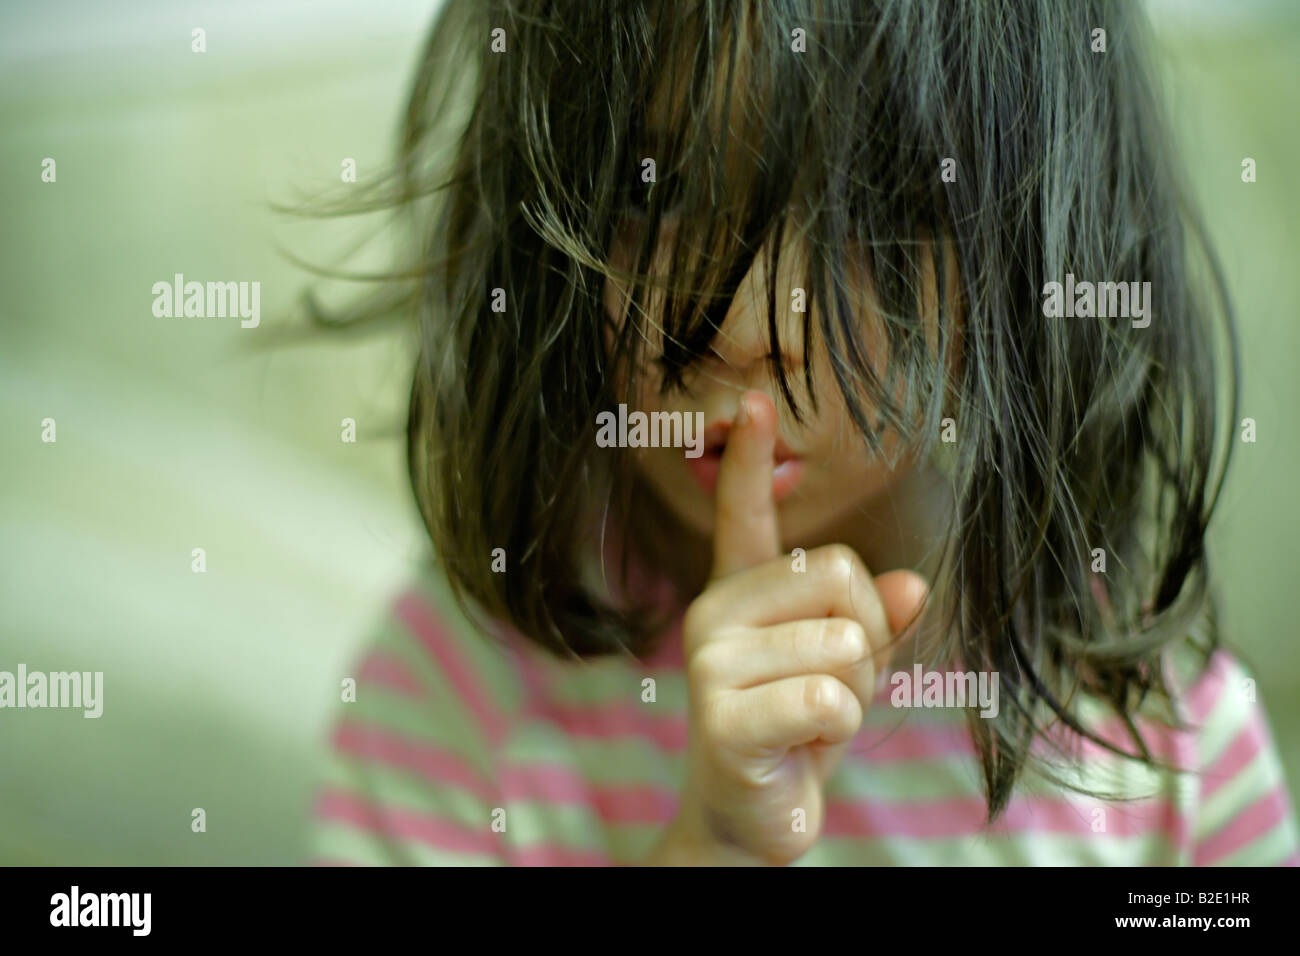 Five year old girl with messy hair Stock Photo